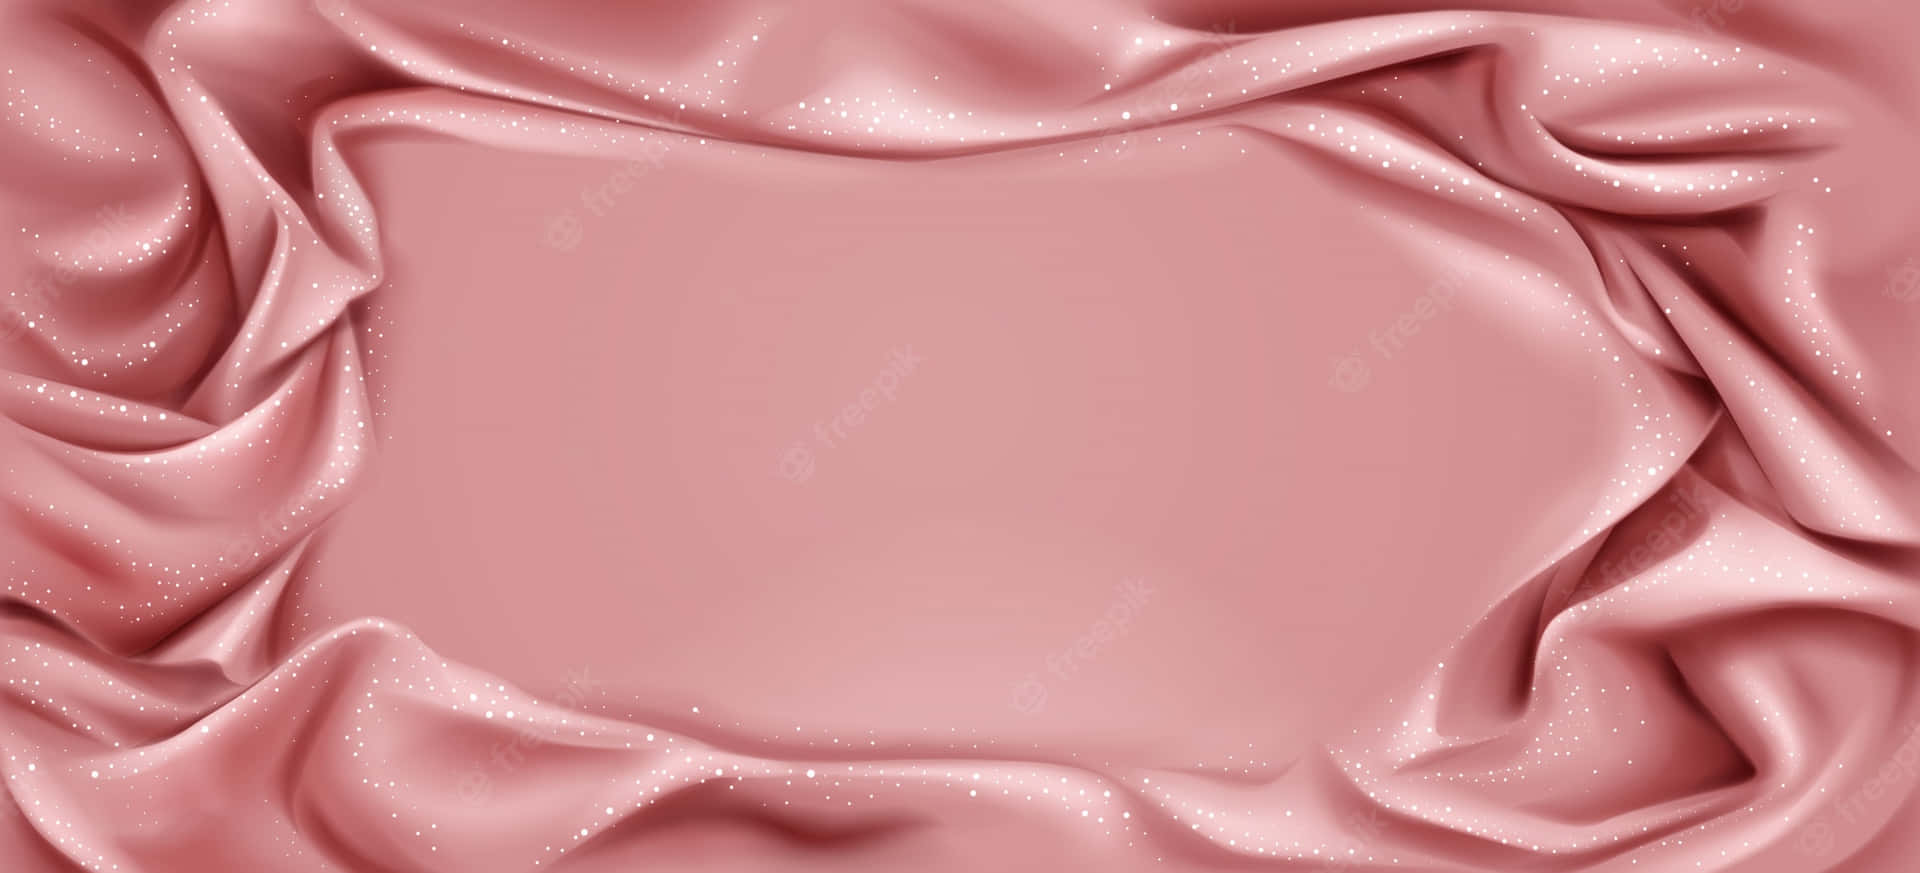 Increase Your Beauty With Pink Silk Aesthetic Wallpaper